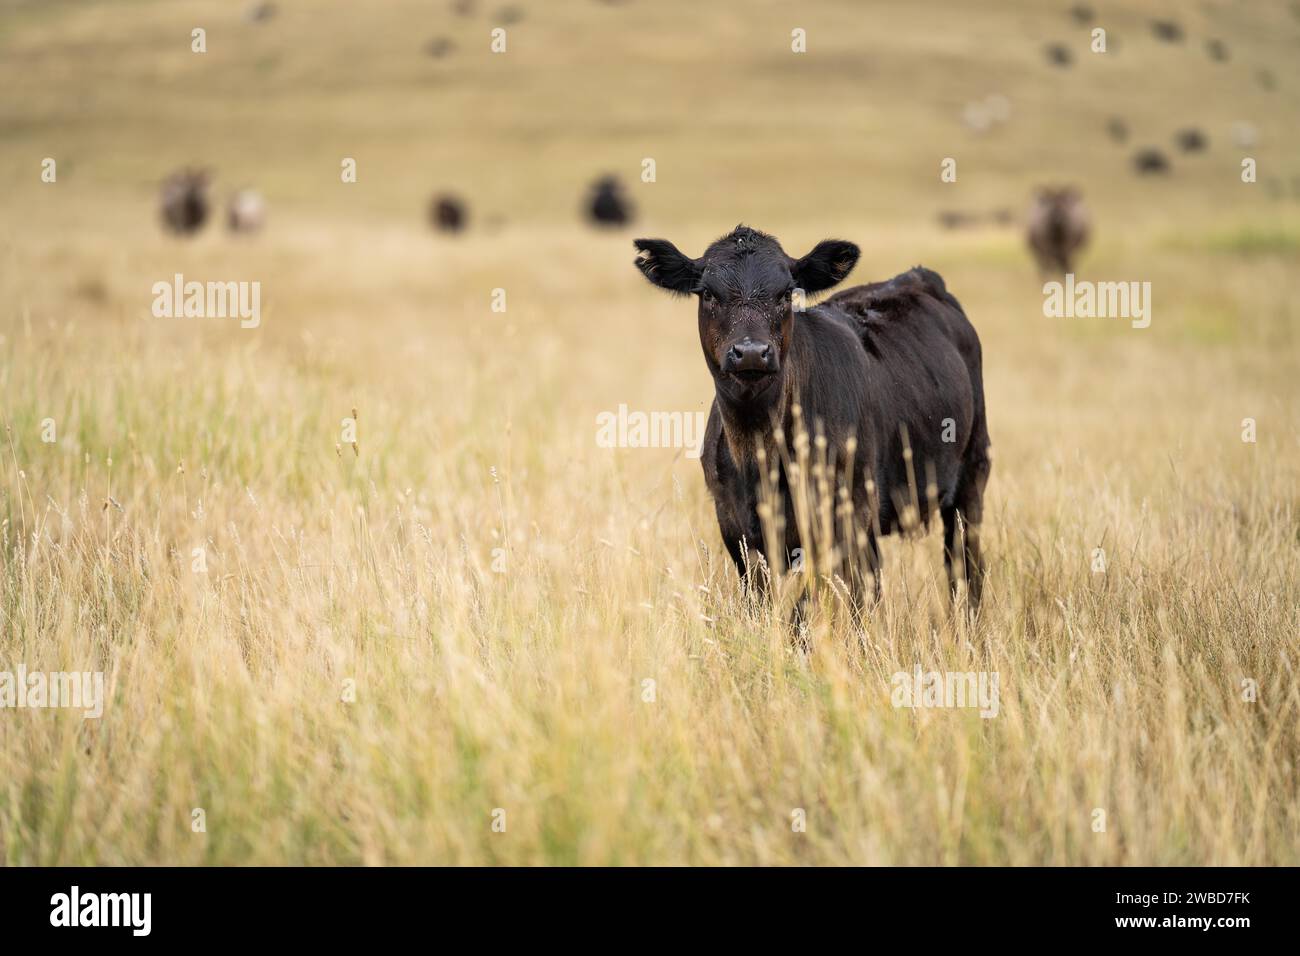 Cows in a field, Stud Beef bulls, cow and cattle grazing on grass in a field, in Australia. breeds include speckle park, murray grey, angus, brangus a Stock Photo